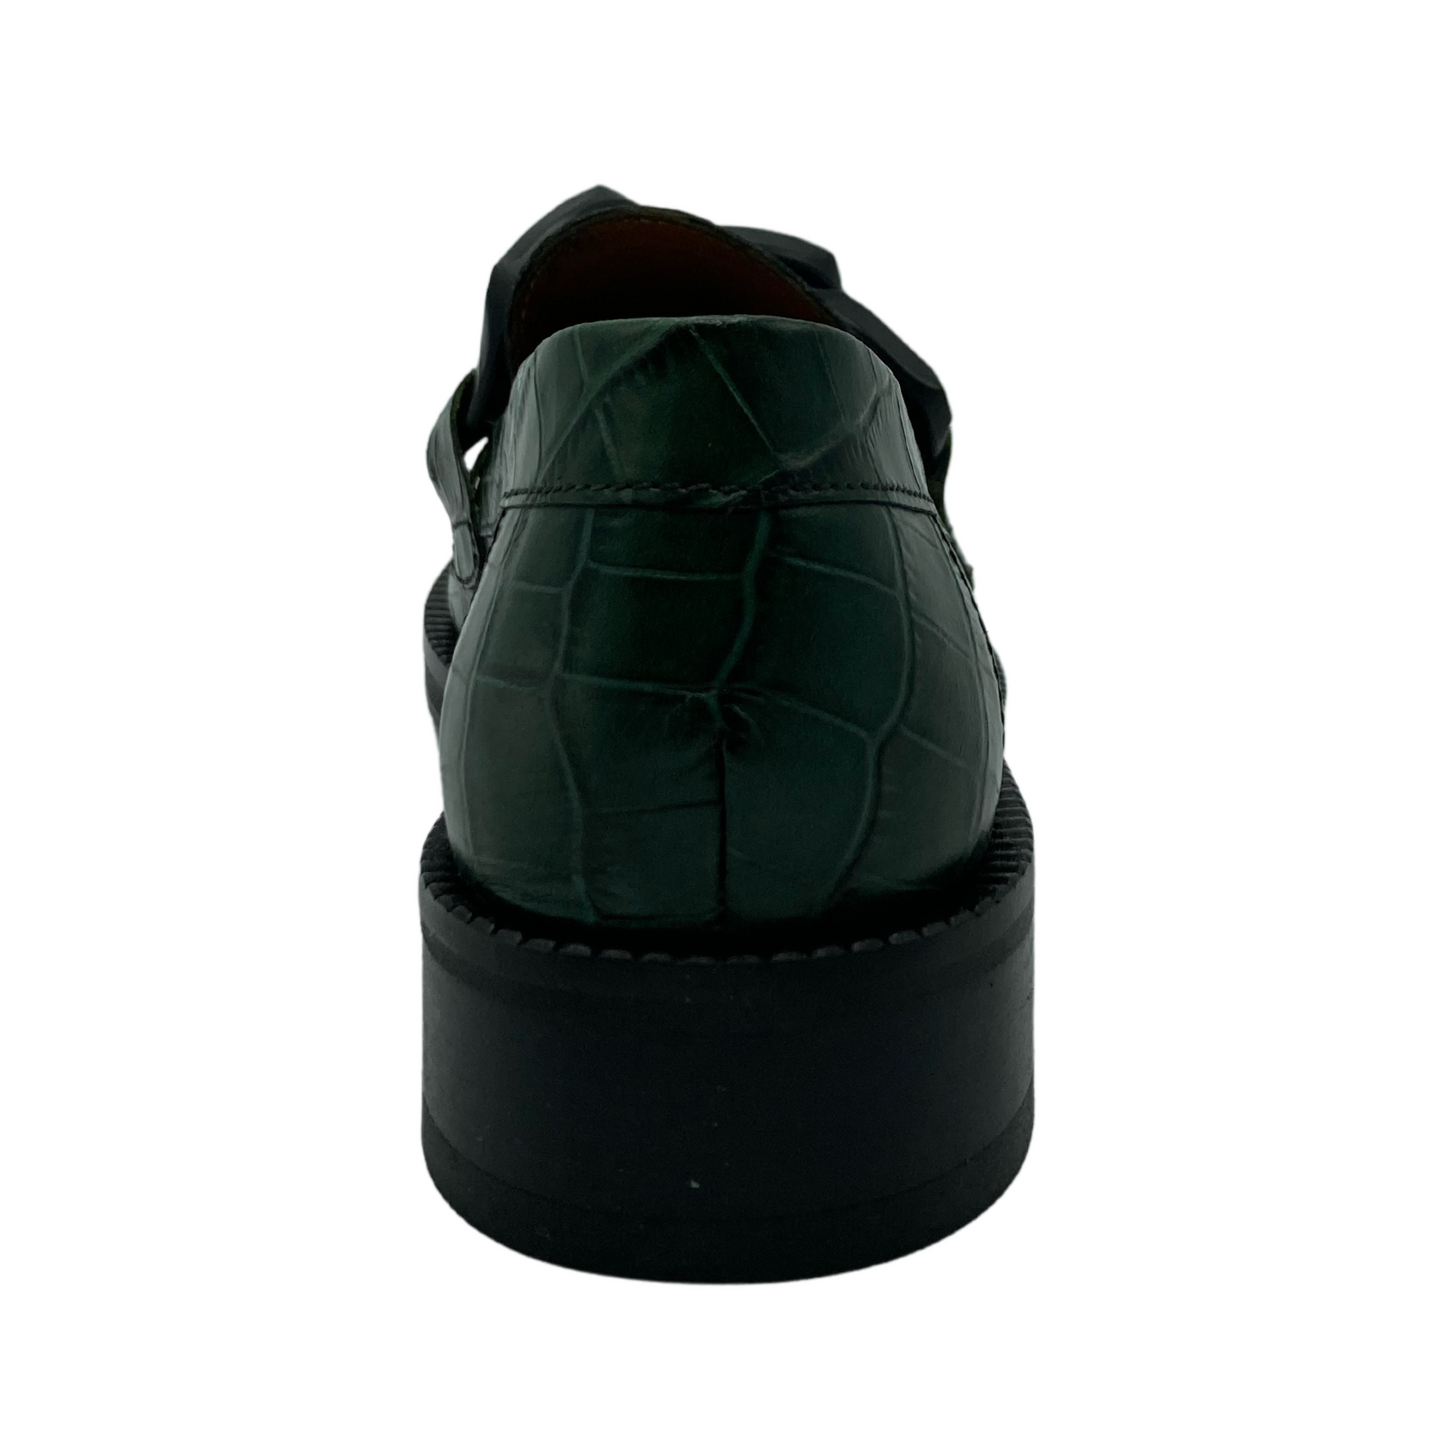 Back view of textured green leather loafer with black block heel